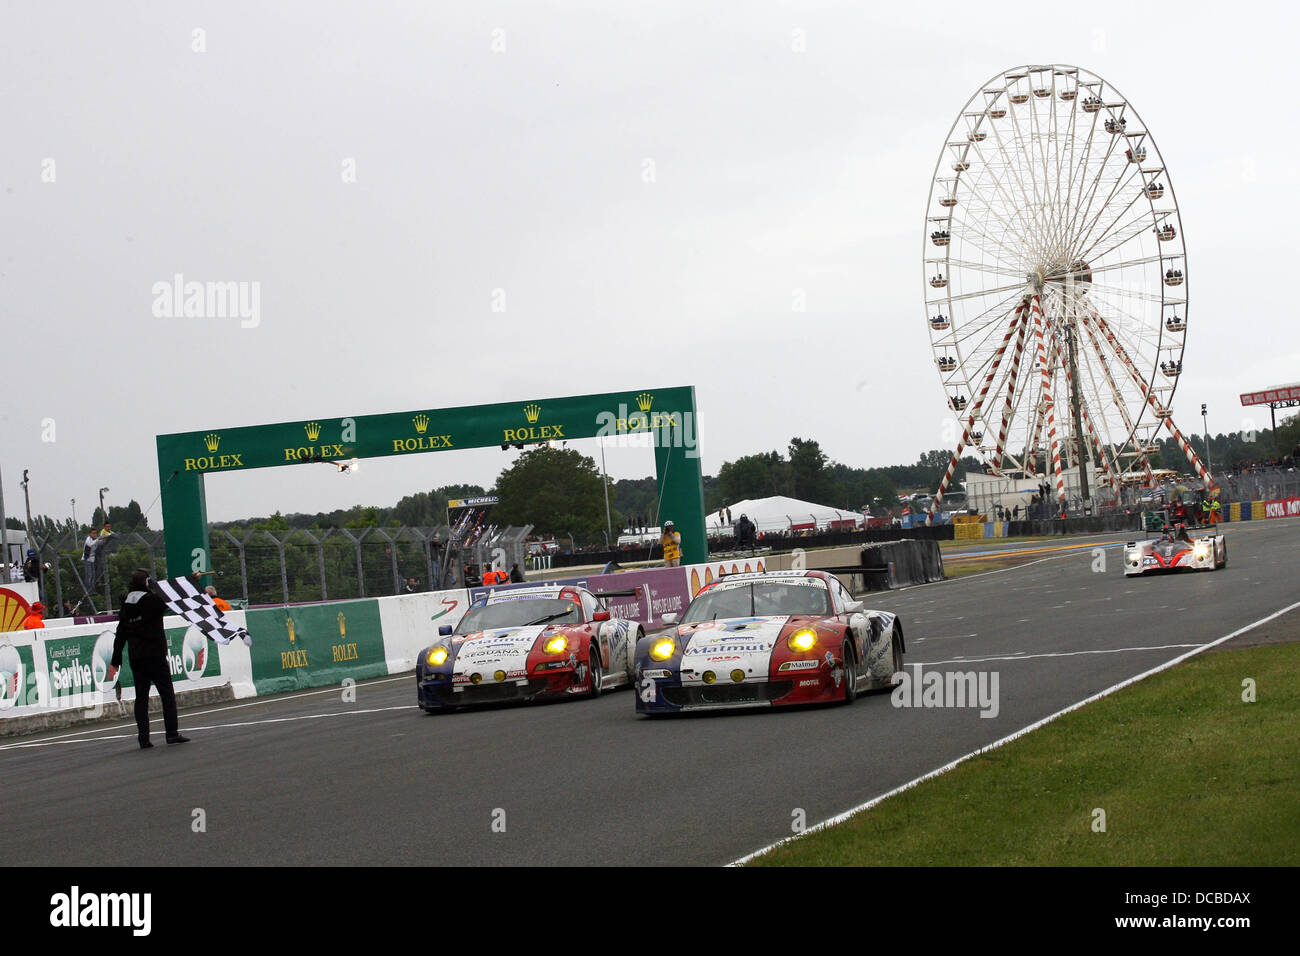 Porsche finish in formation at the 2013 Le Mans 24 Hours. Stock Photo